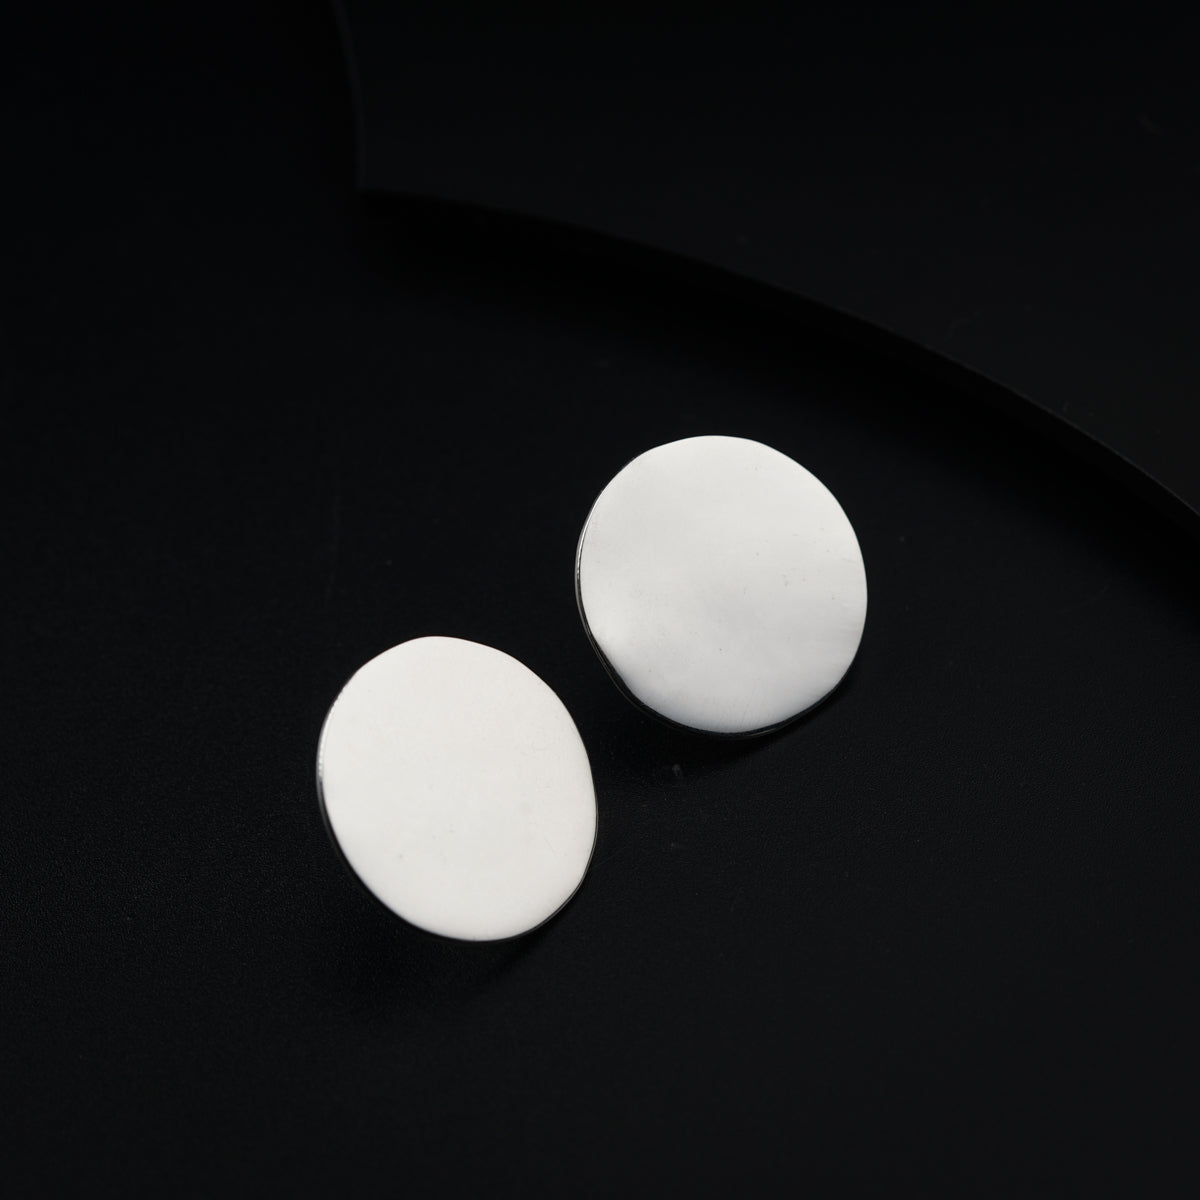 two white circles sitting on top of a black surface